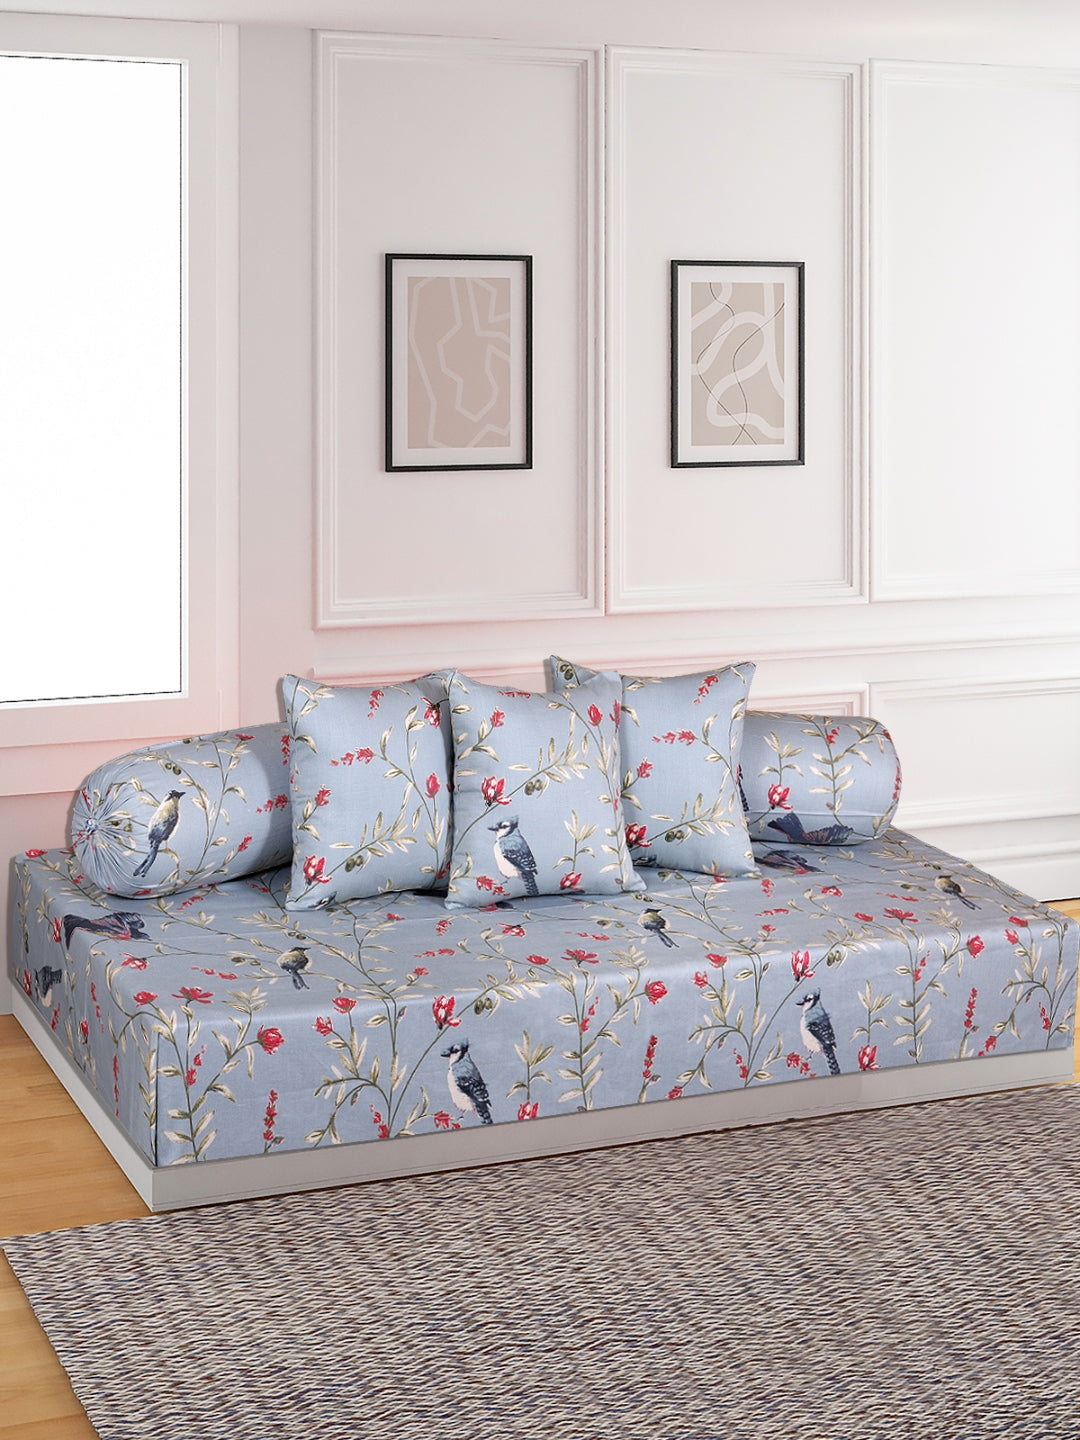 Floral Printed Cotton Diwan Set with Bolster and Cushion Covers - Grey